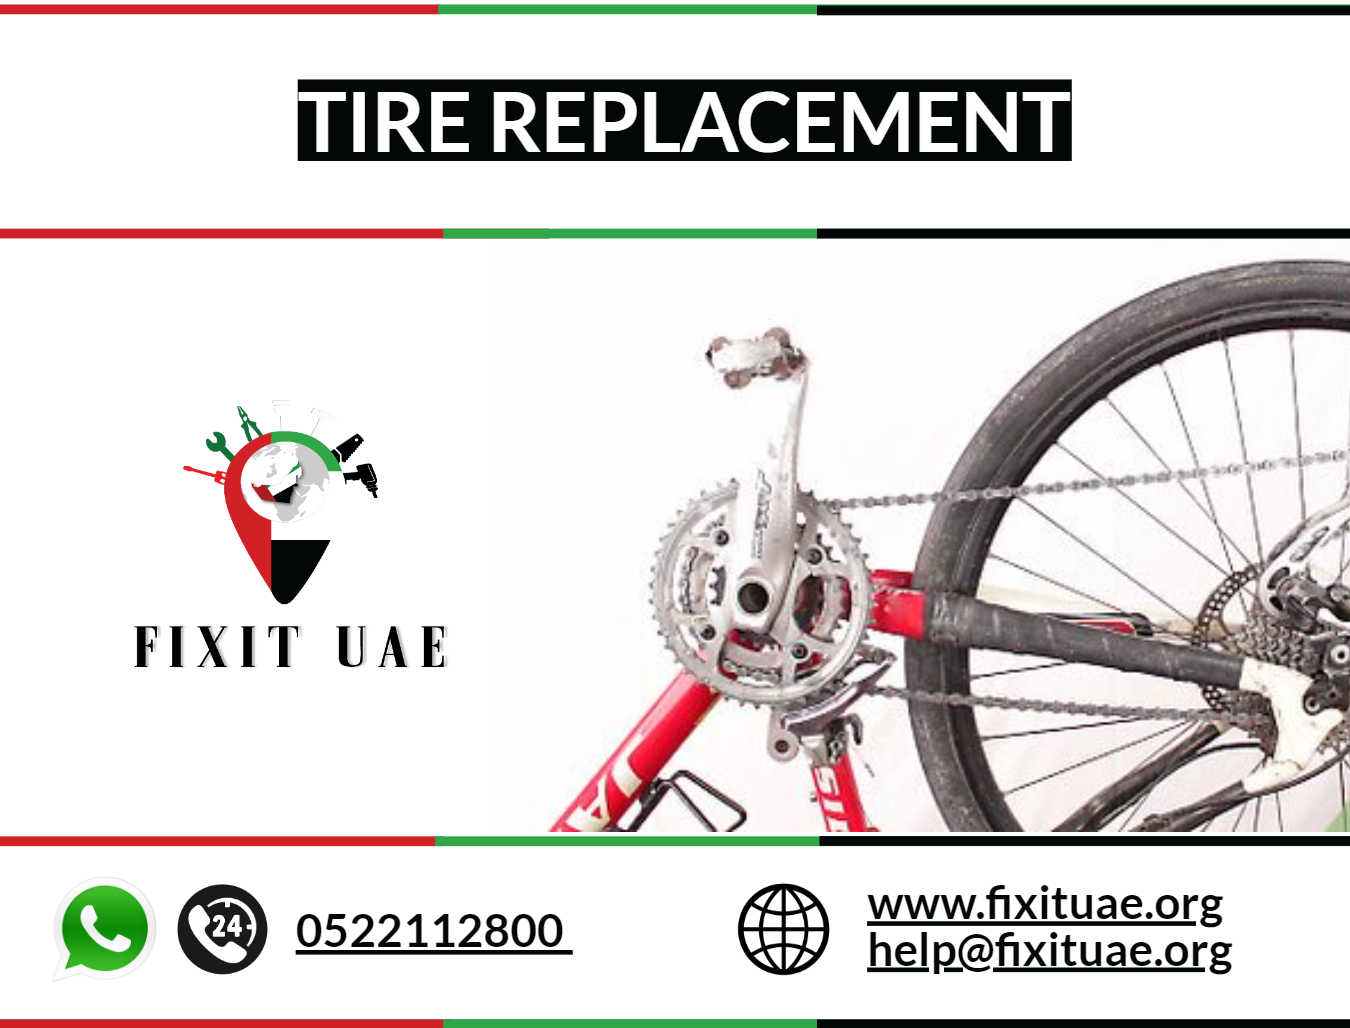 Tire Replacement